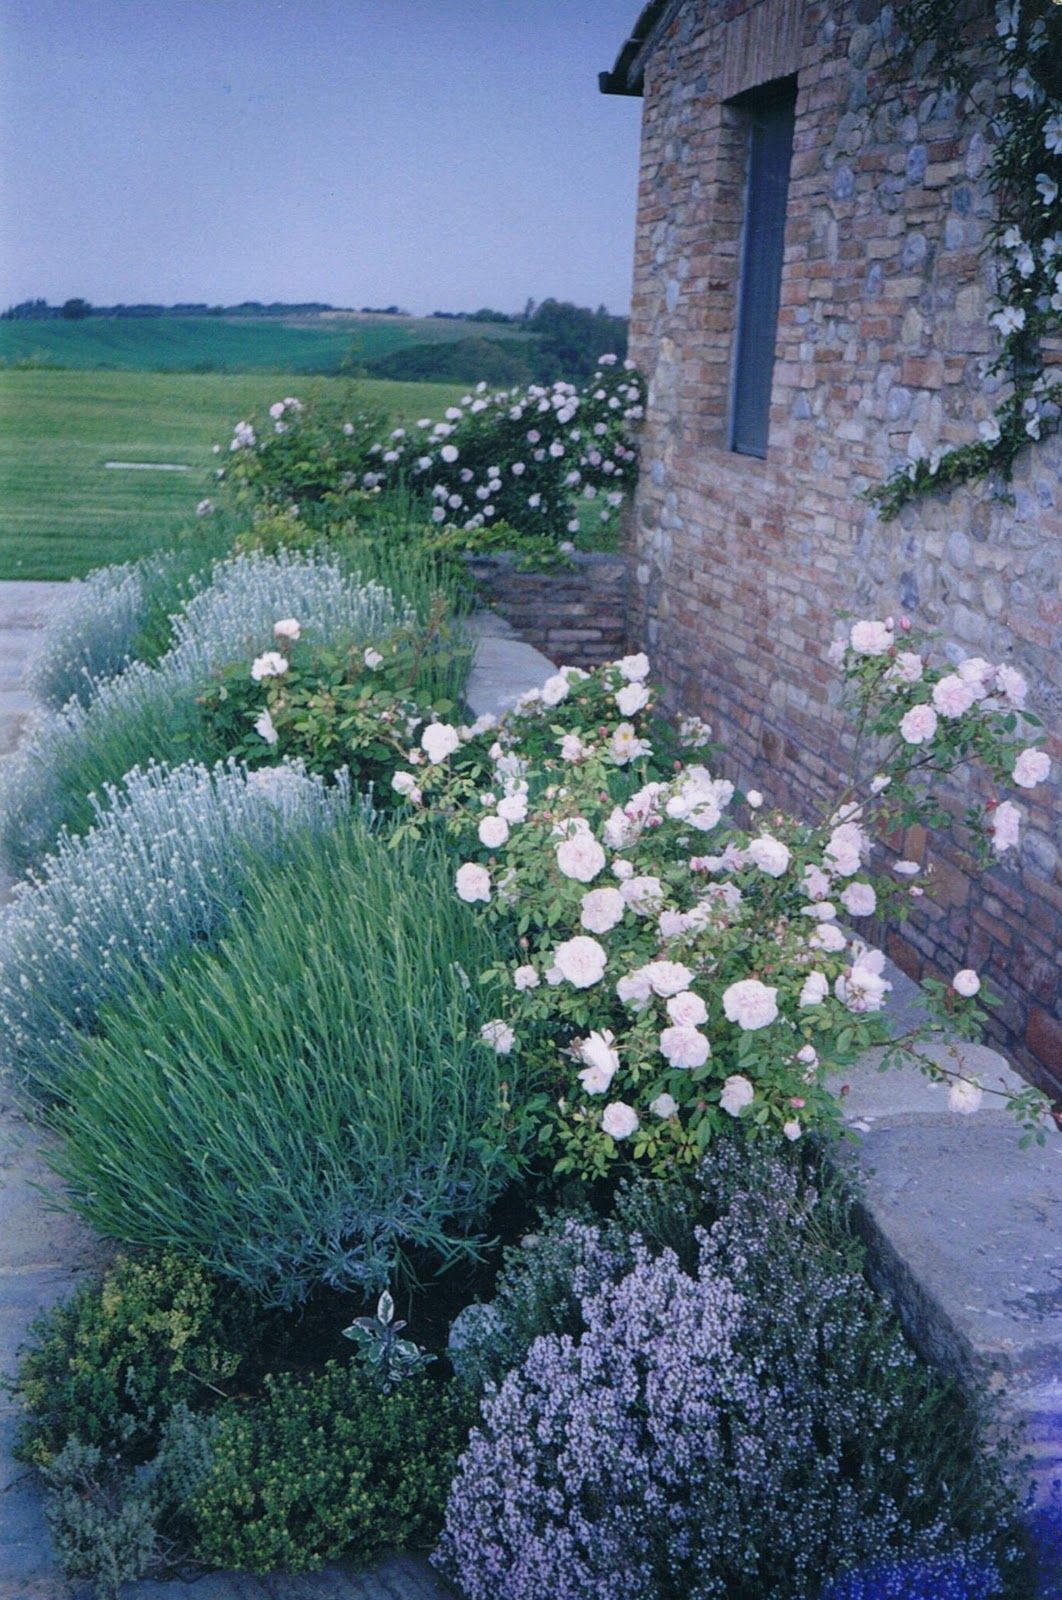 Herbs planted with roses – I would love to live in a place like this